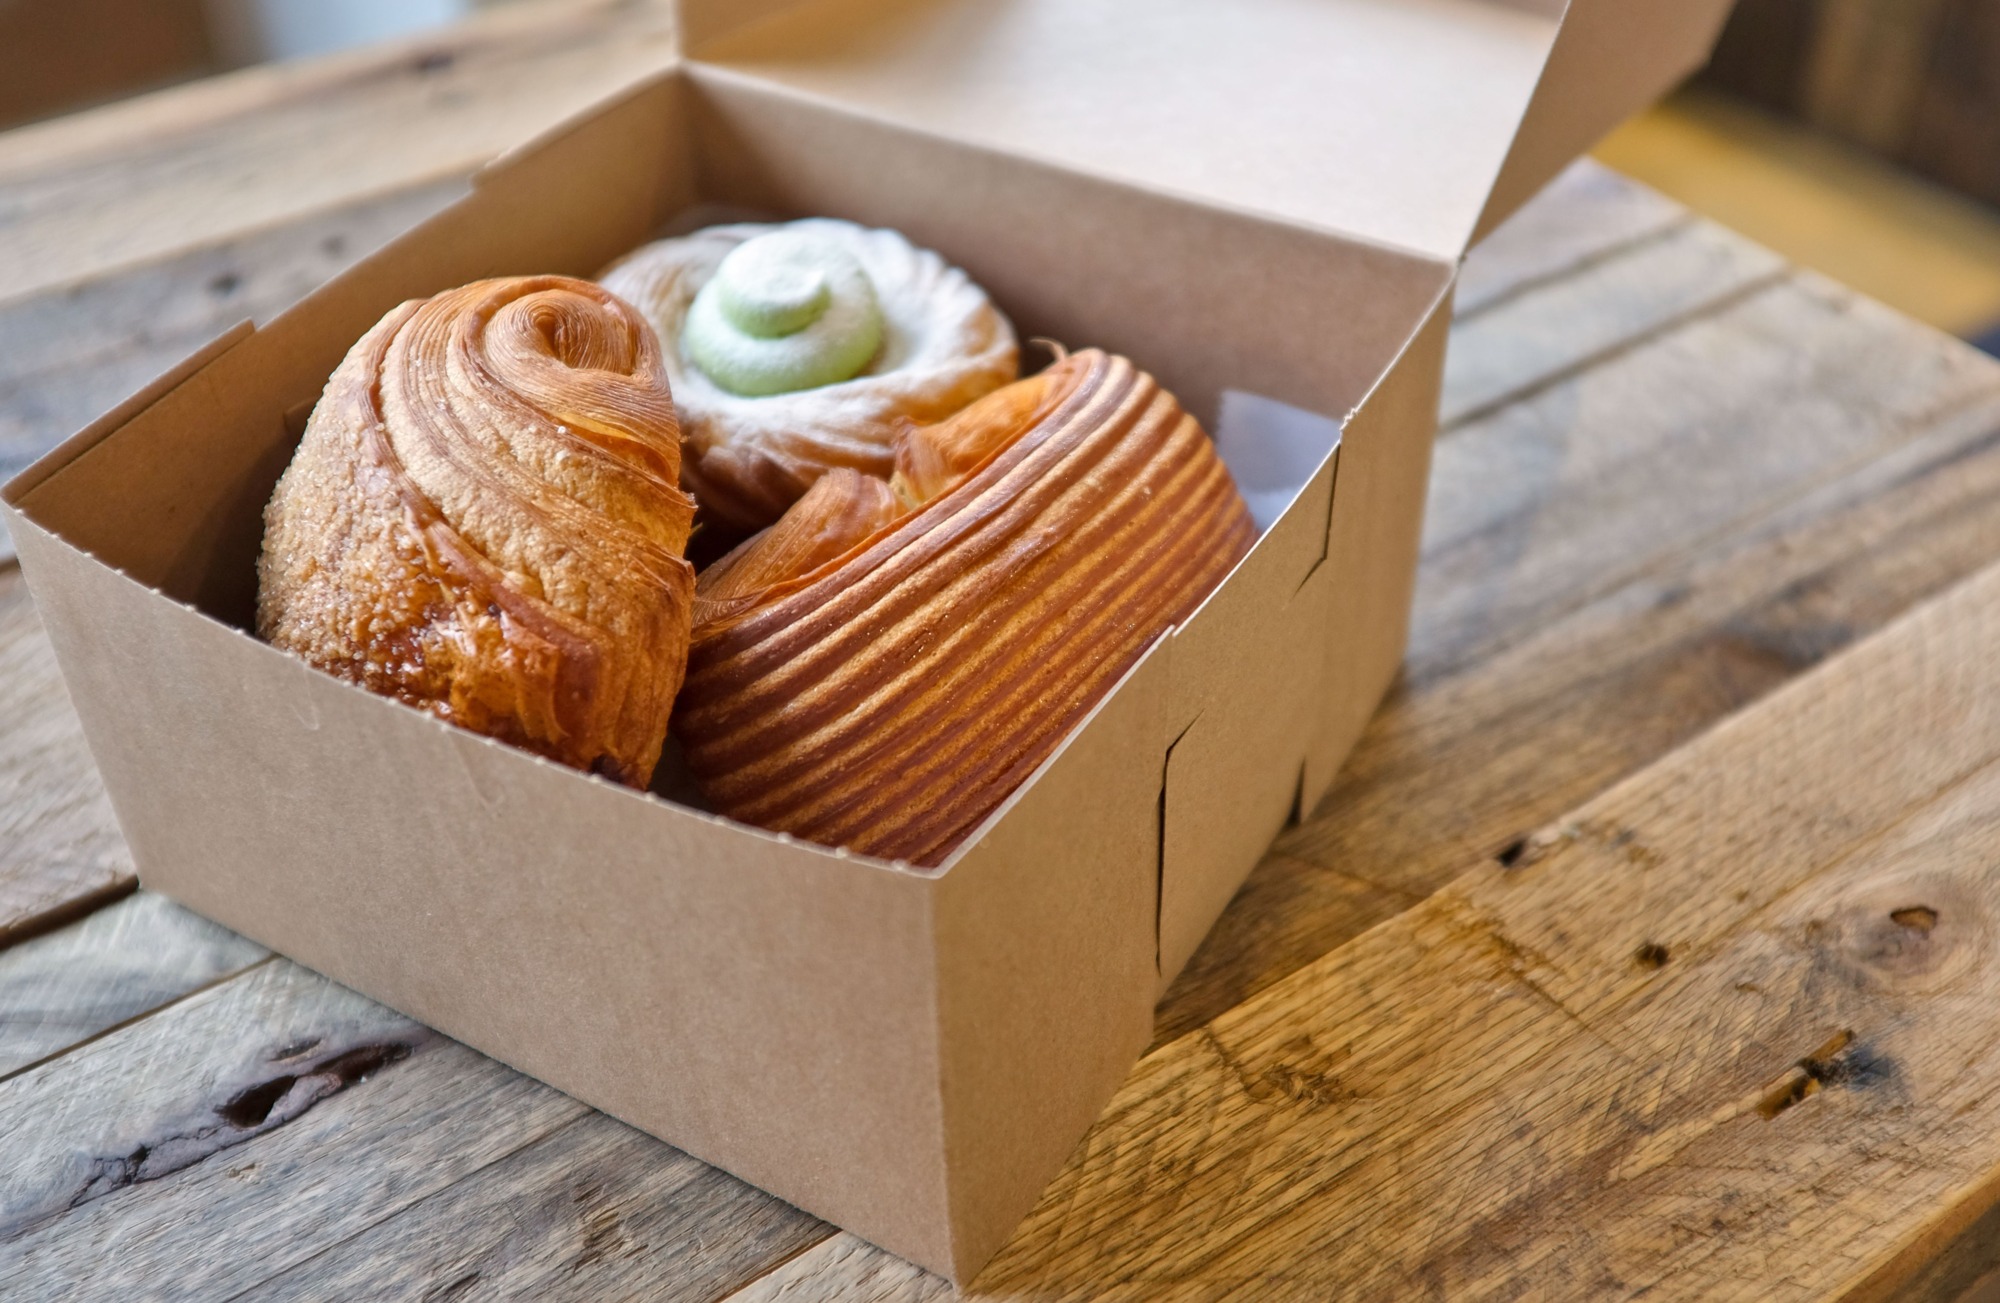 A box of croissant pastries from a Charlotte bakery